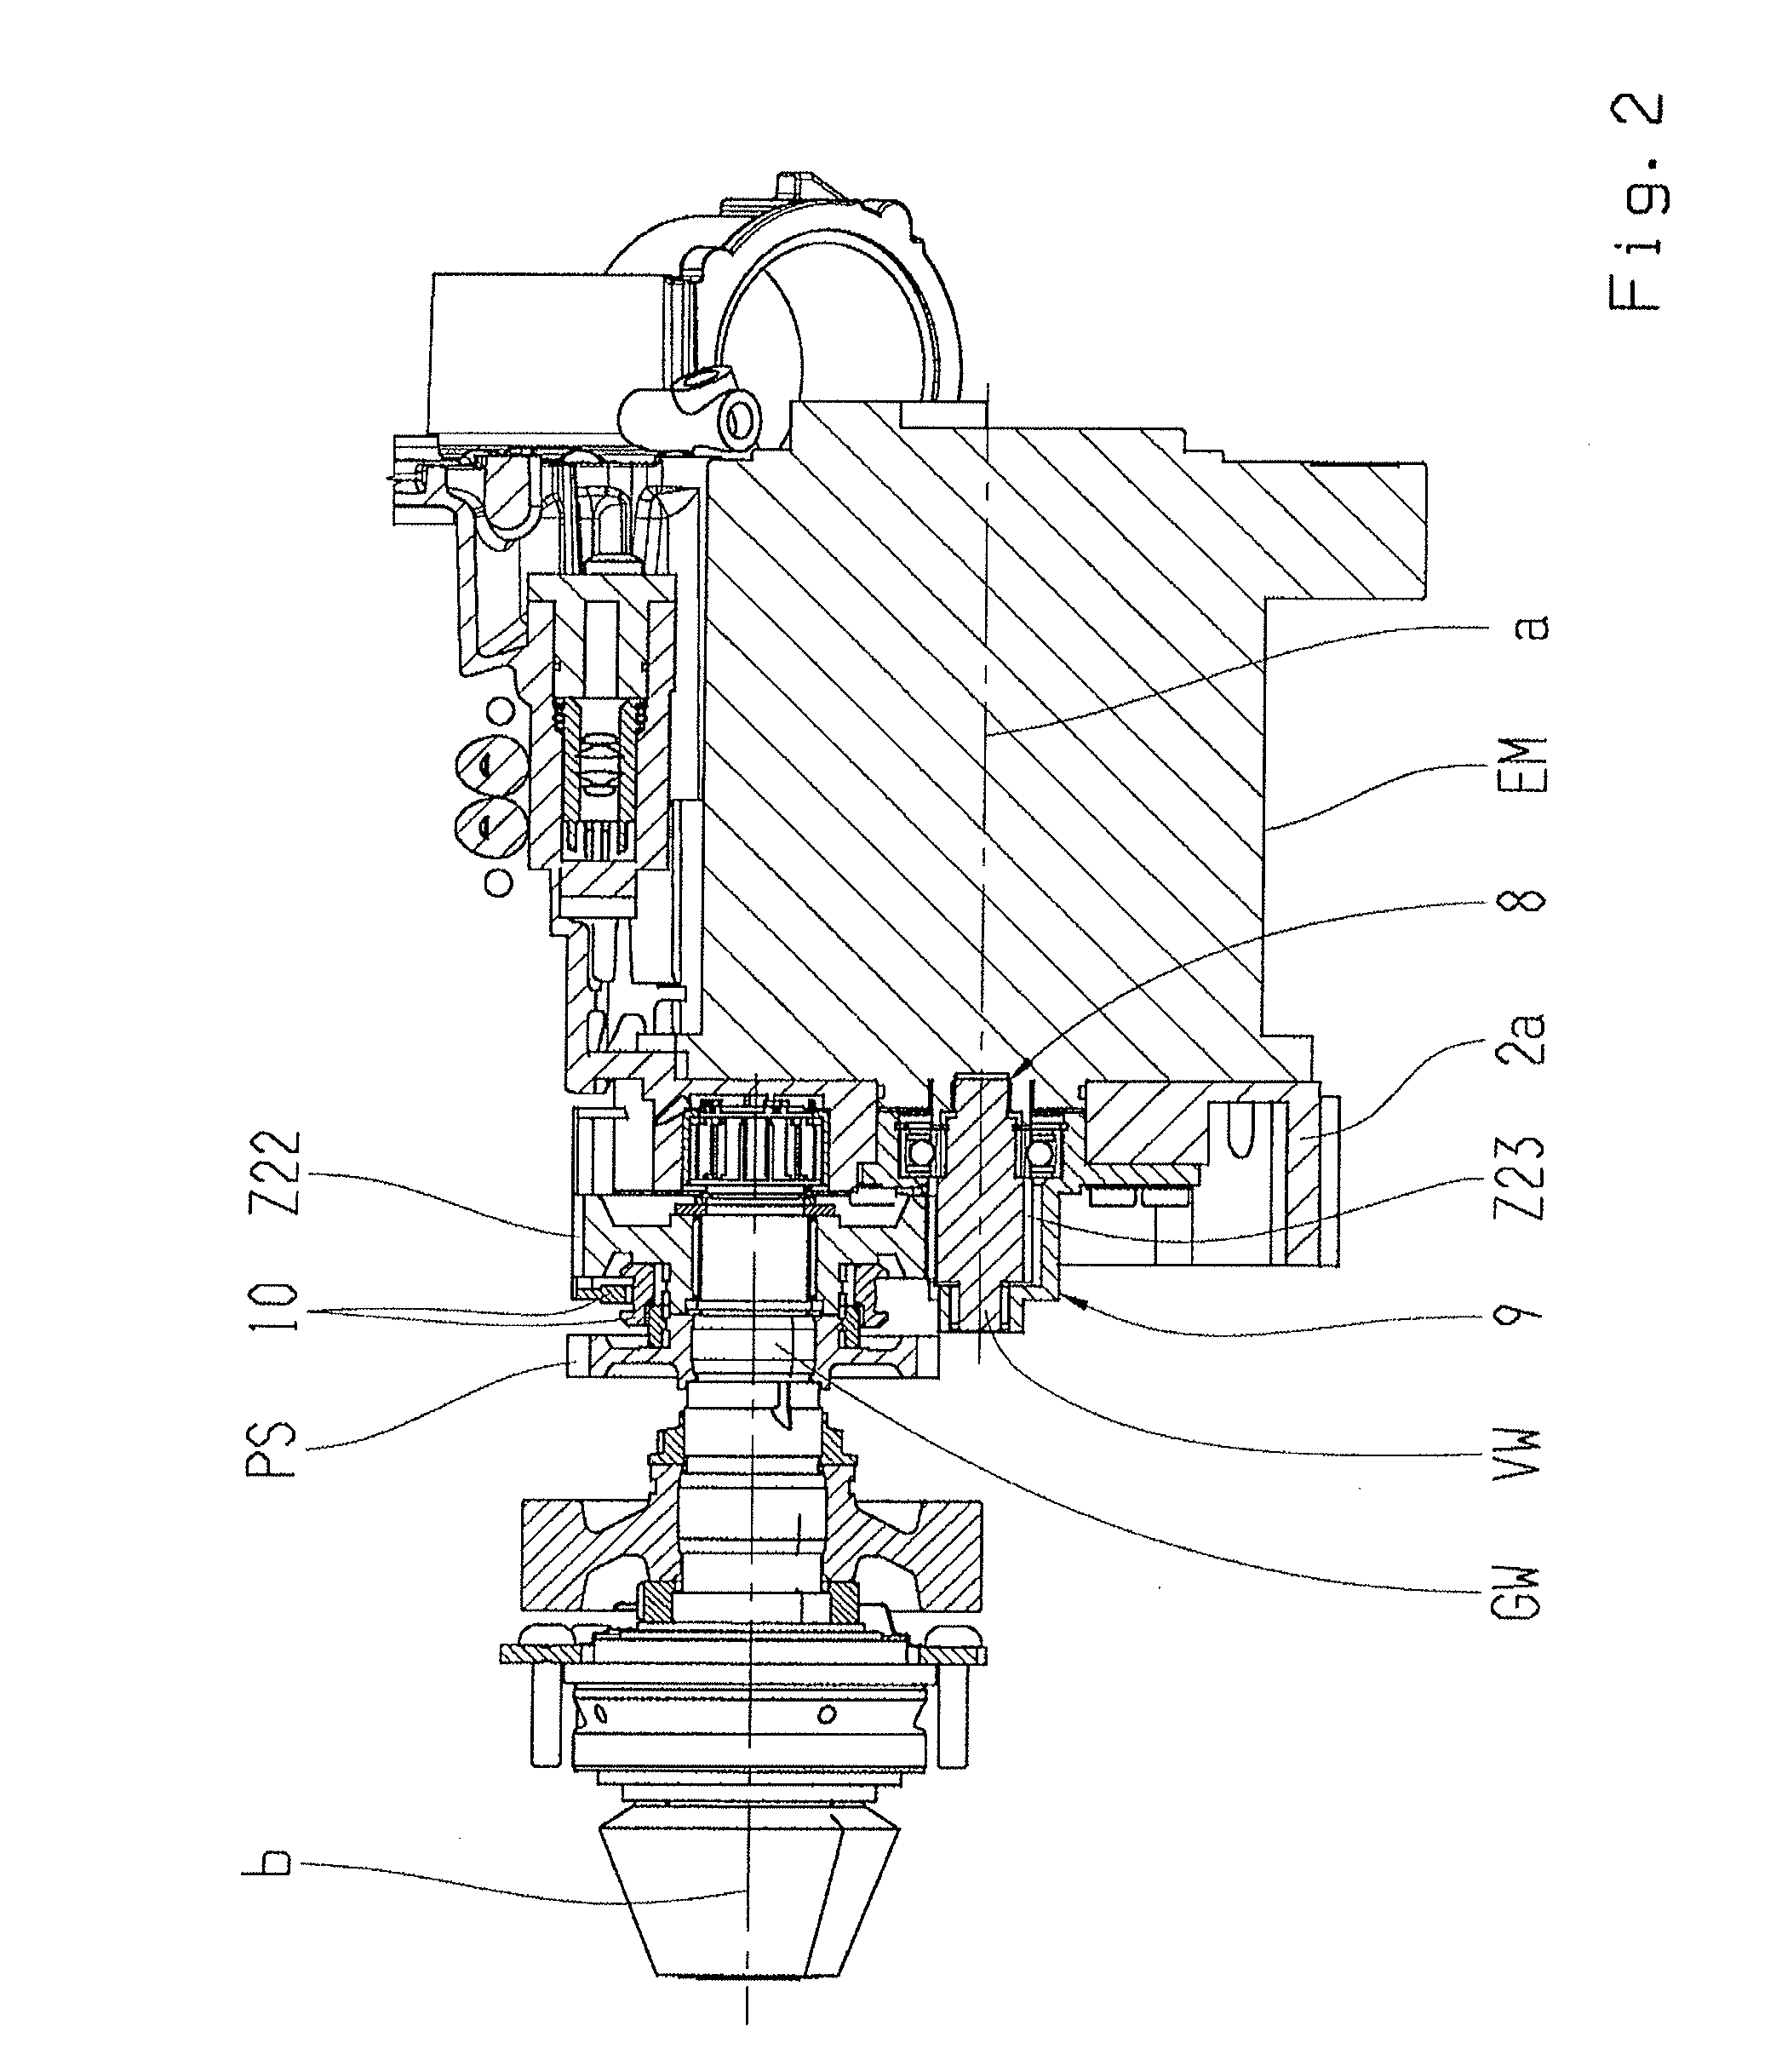 Vehicular transmission with power take-off unit